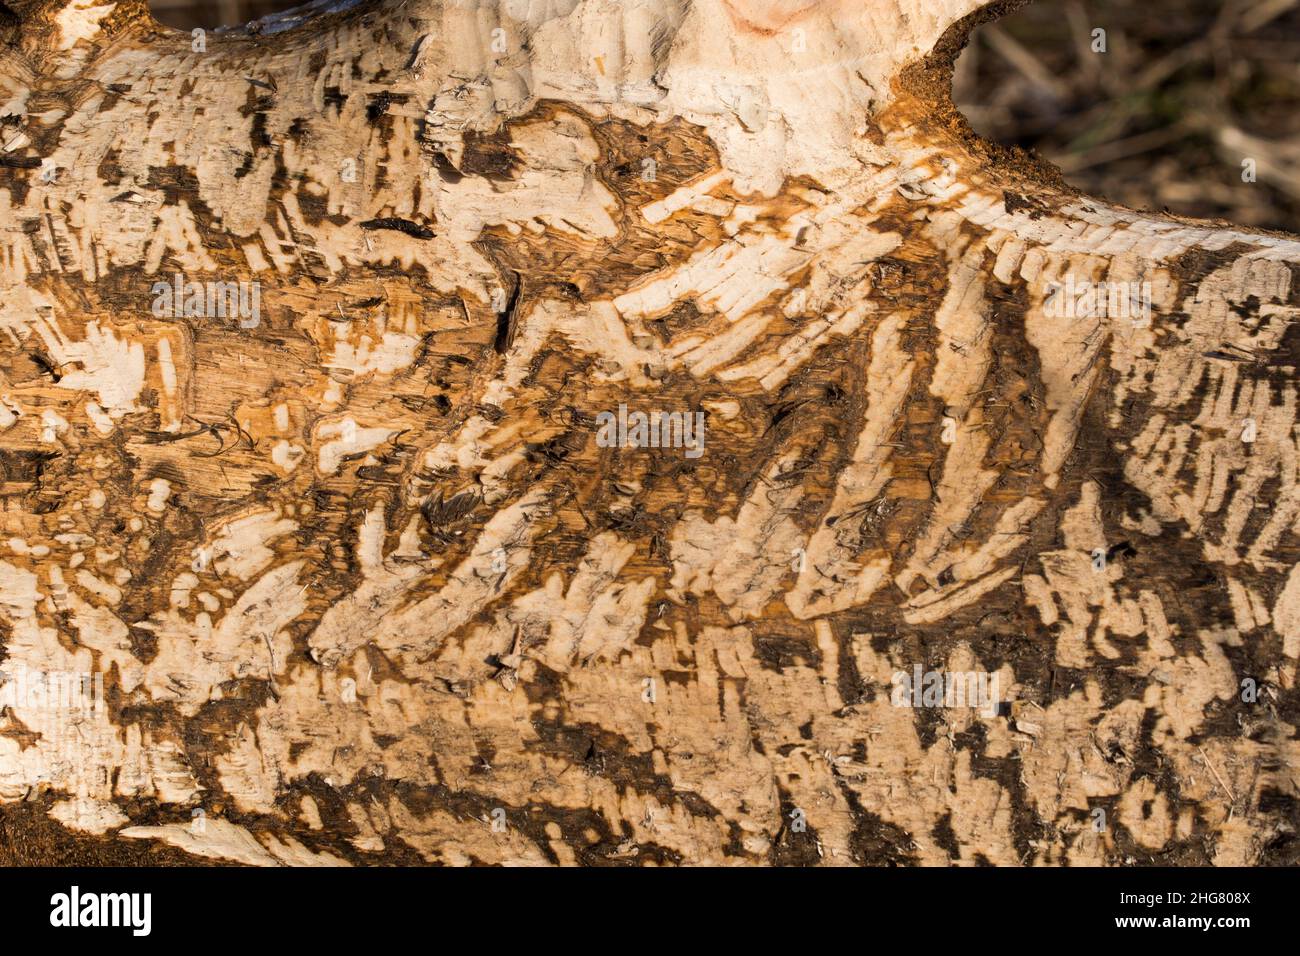 tree trunk gnawed by bears closeup selective focus Stock Photo